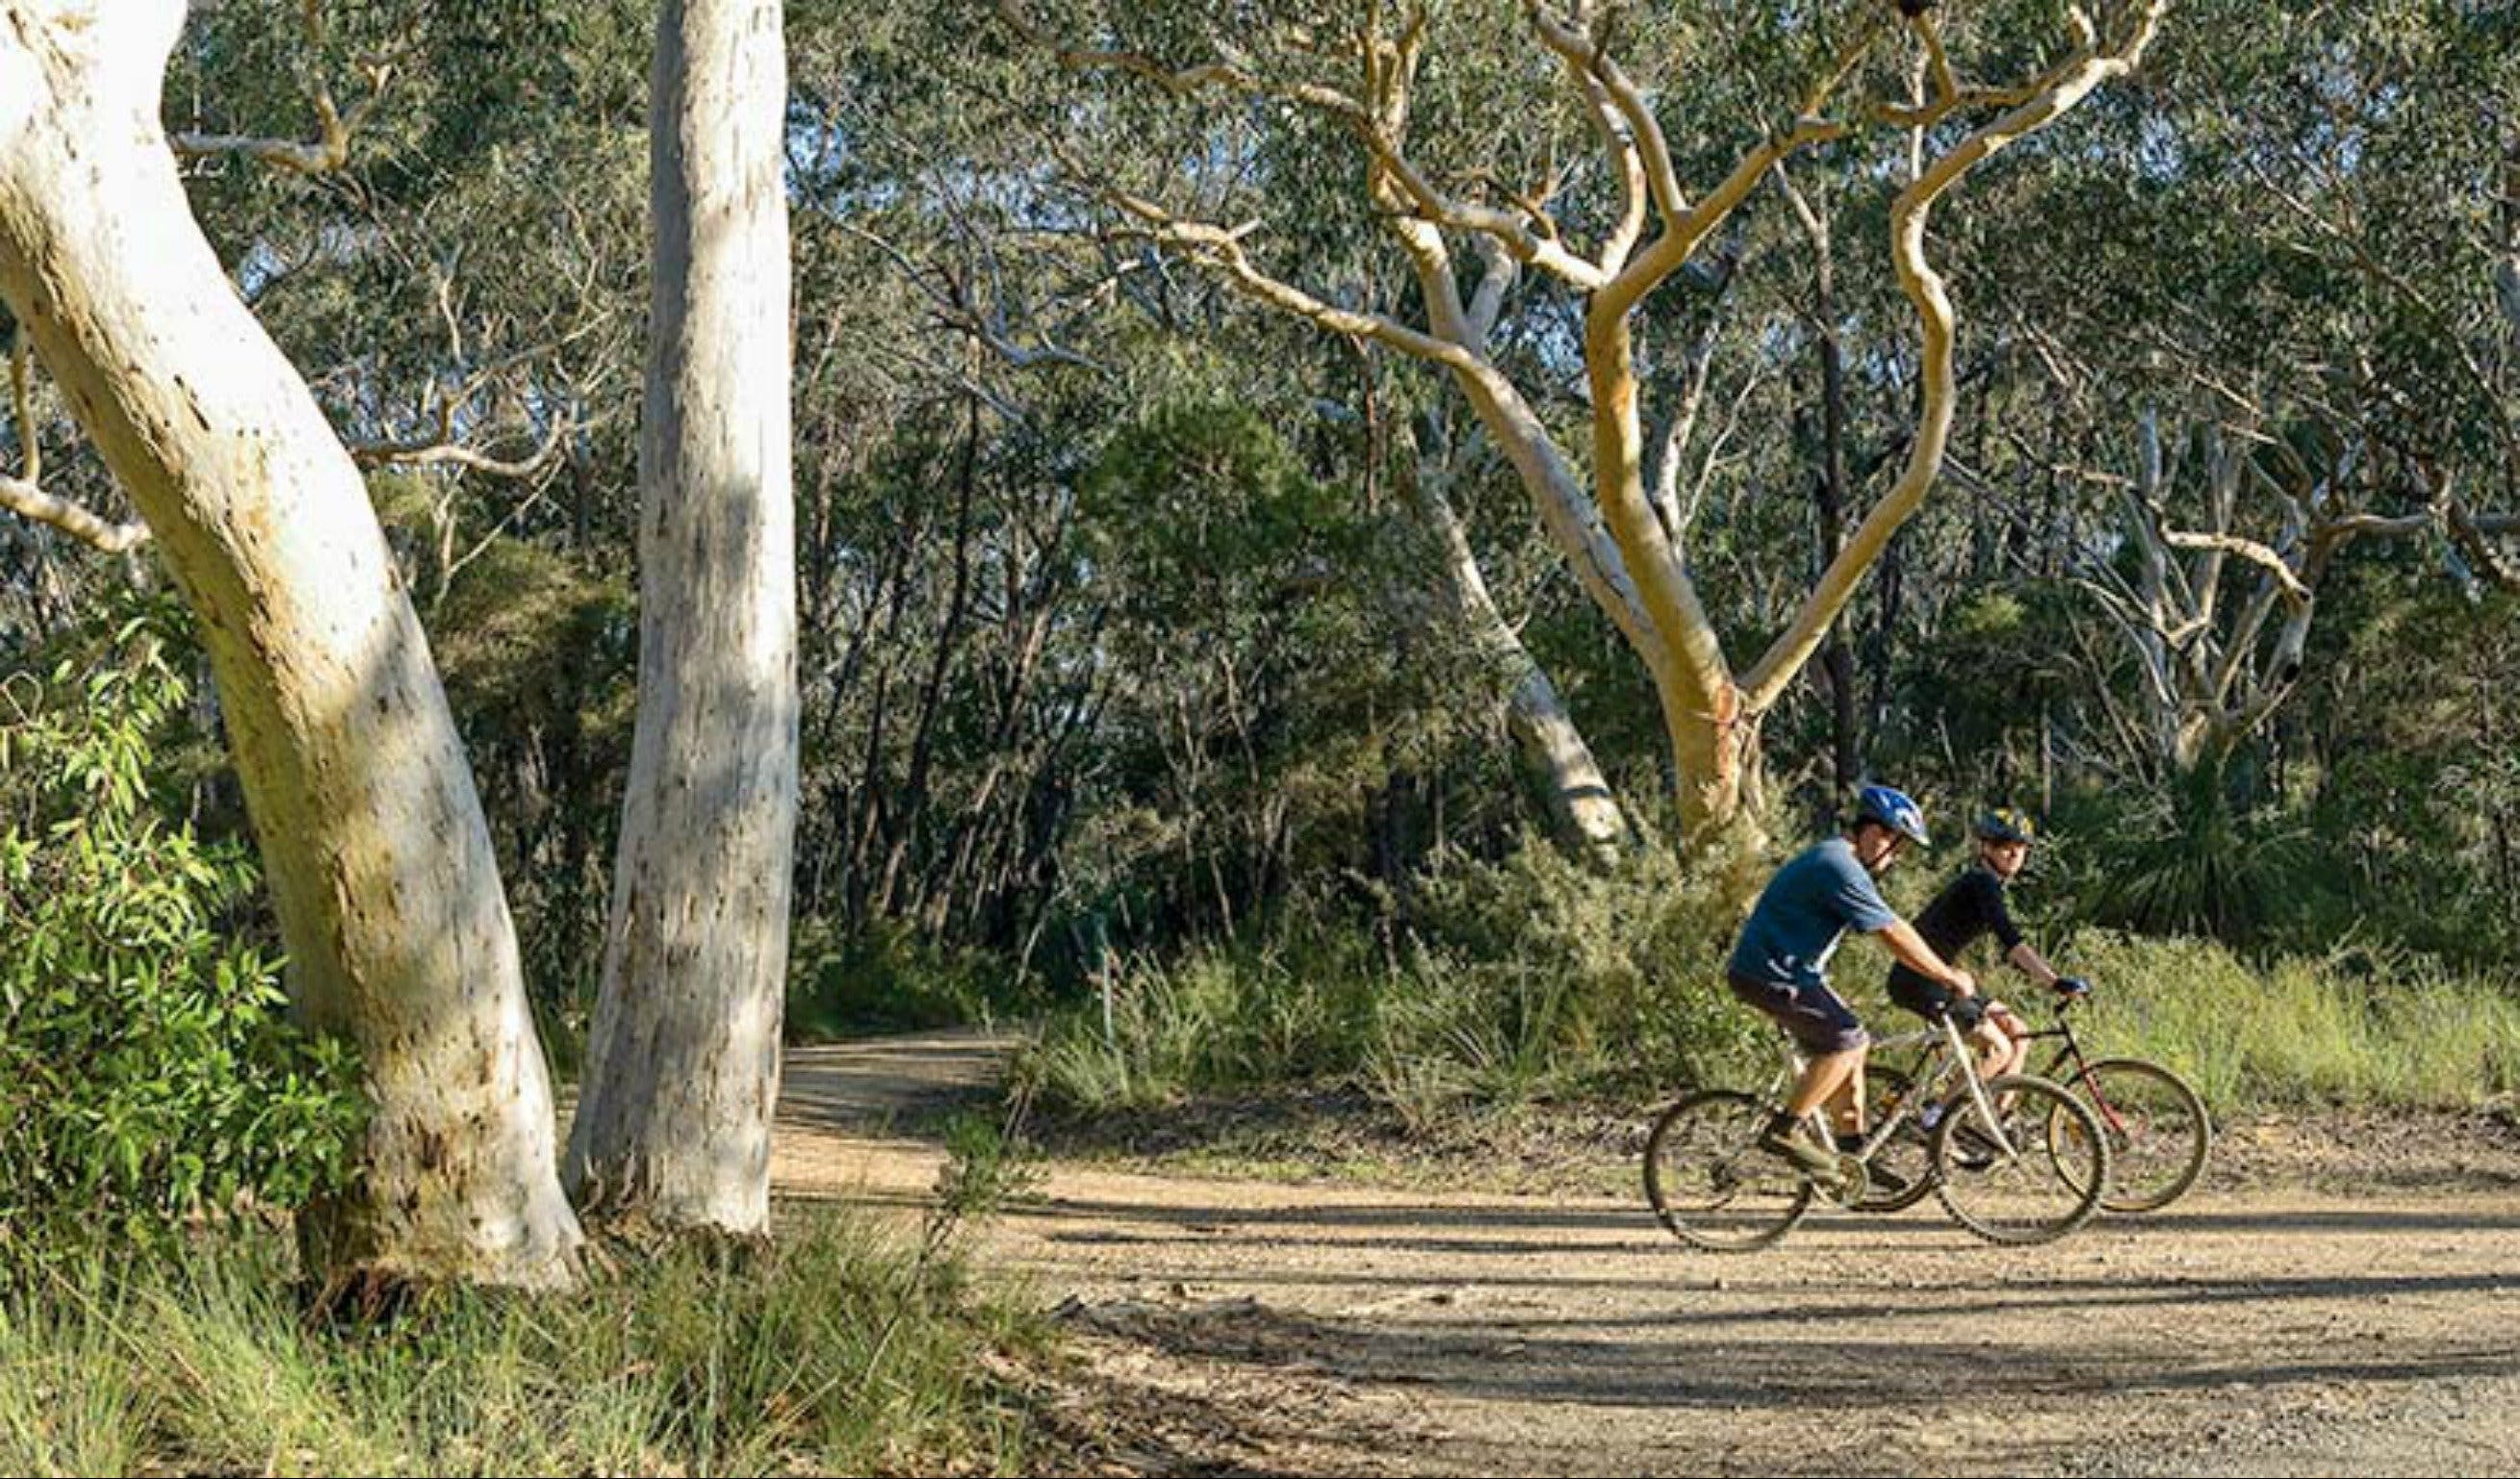 Bundanoon cycling route - Find Attractions